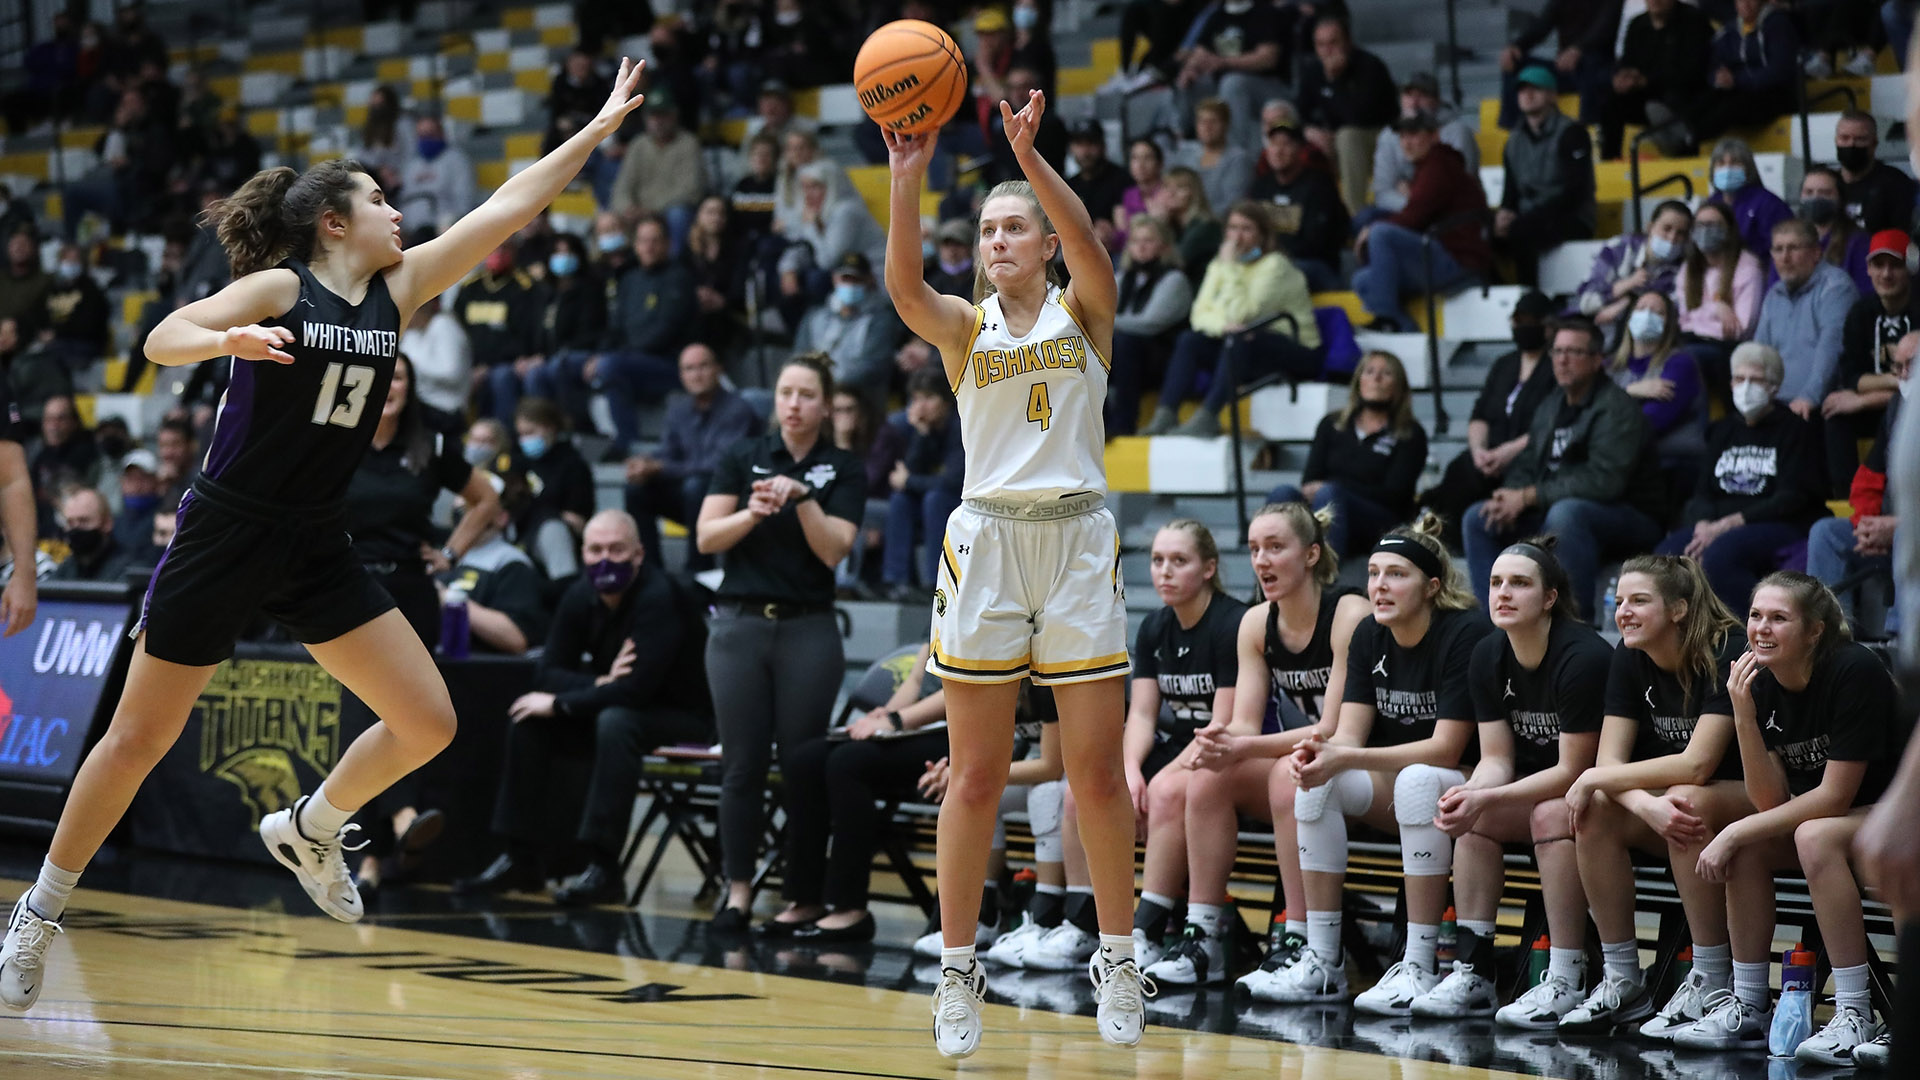 Jenna Jorgensen scored 14 points against the Warhawks, including a 3-point basket that put the Titans ahead 52-51 with 3:46 to play.